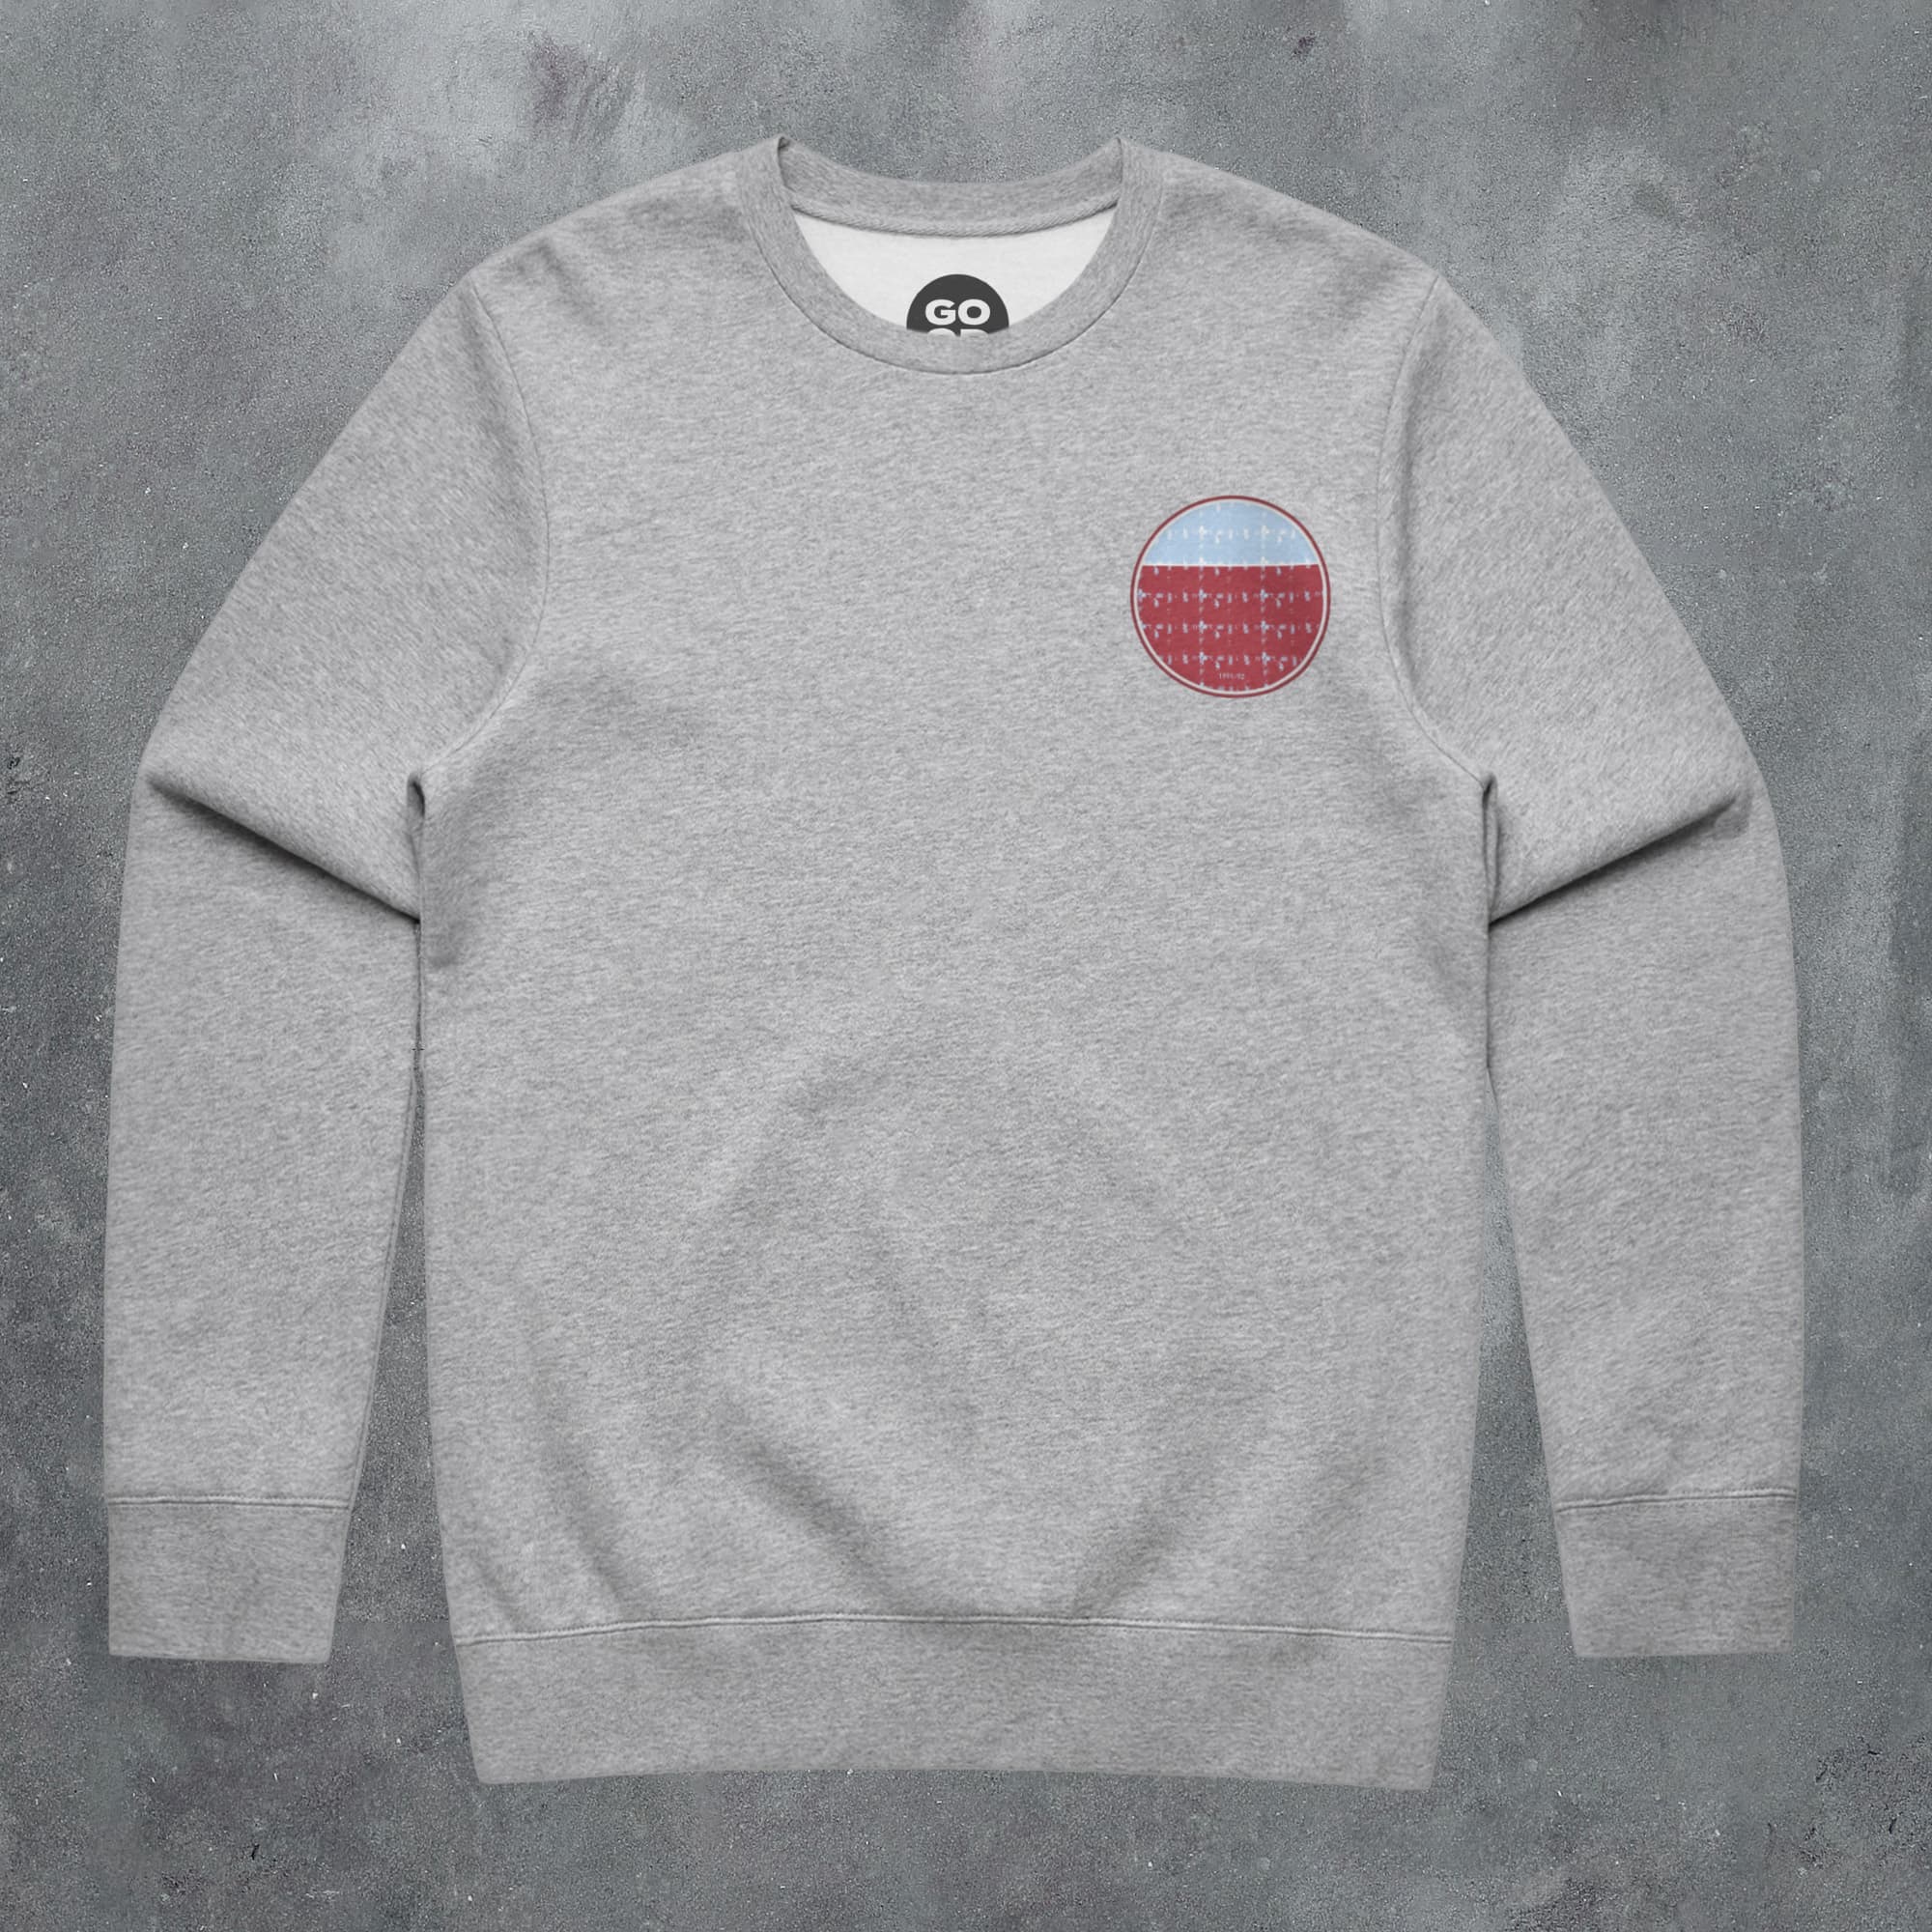 a grey sweatshirt with a red and blue patch on the chest